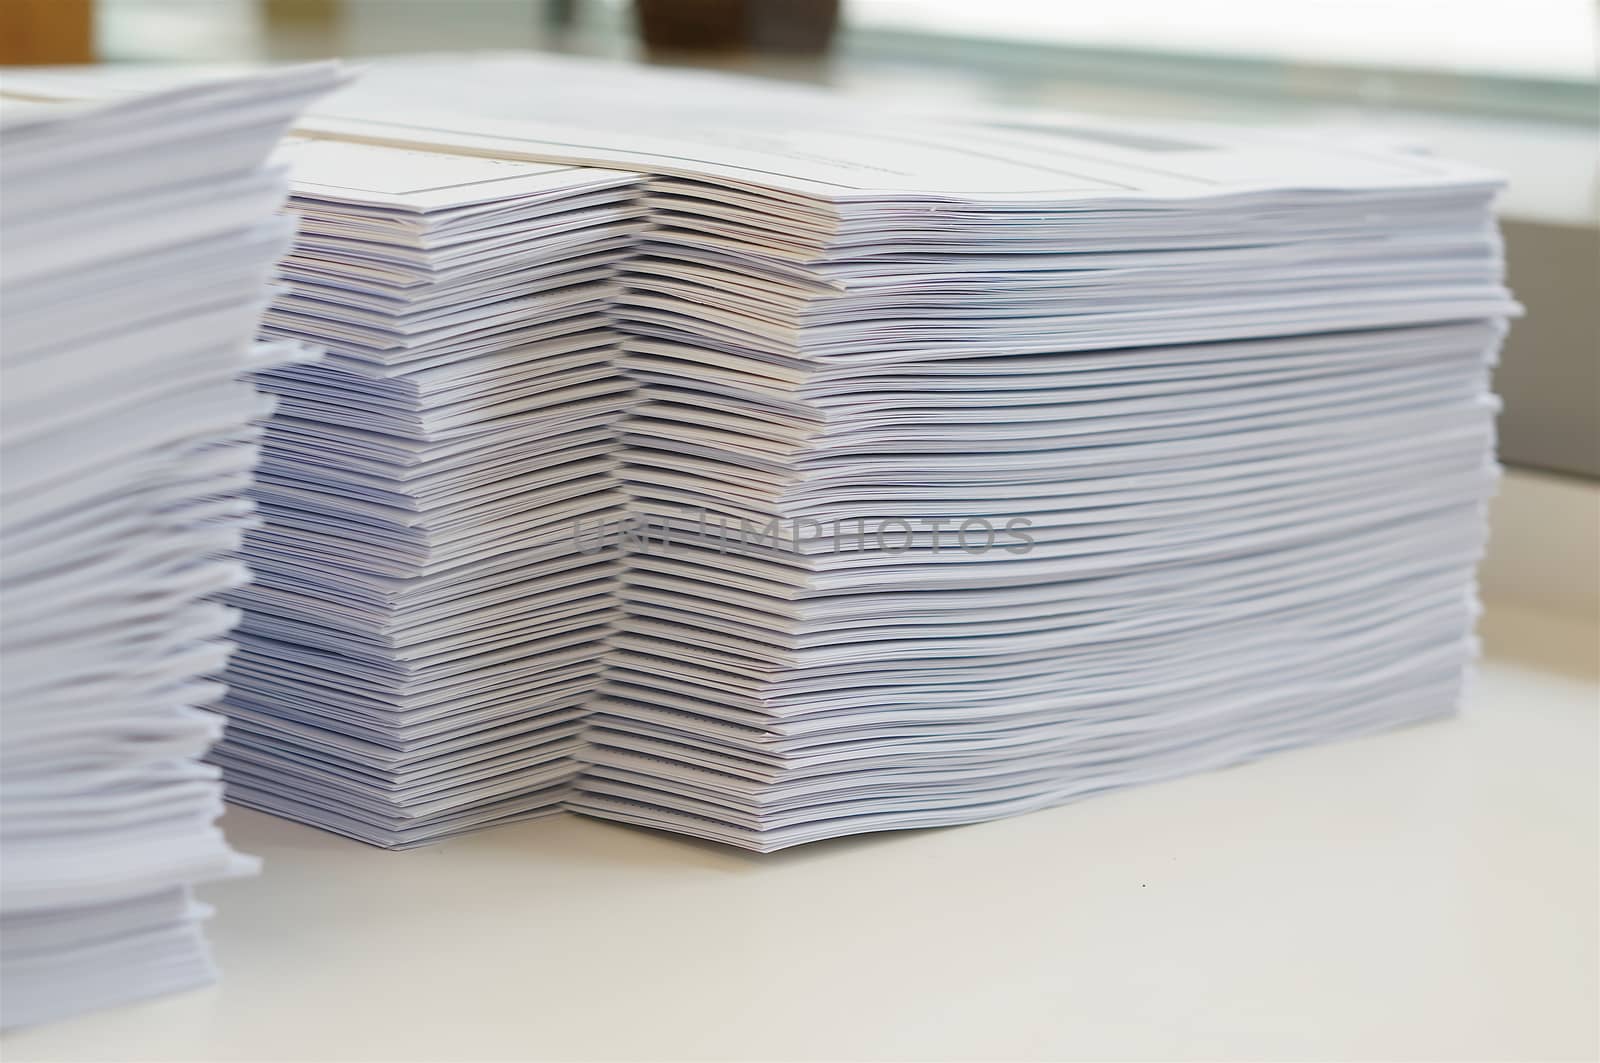 Stack of white papers sheet was organized  on office background.                                